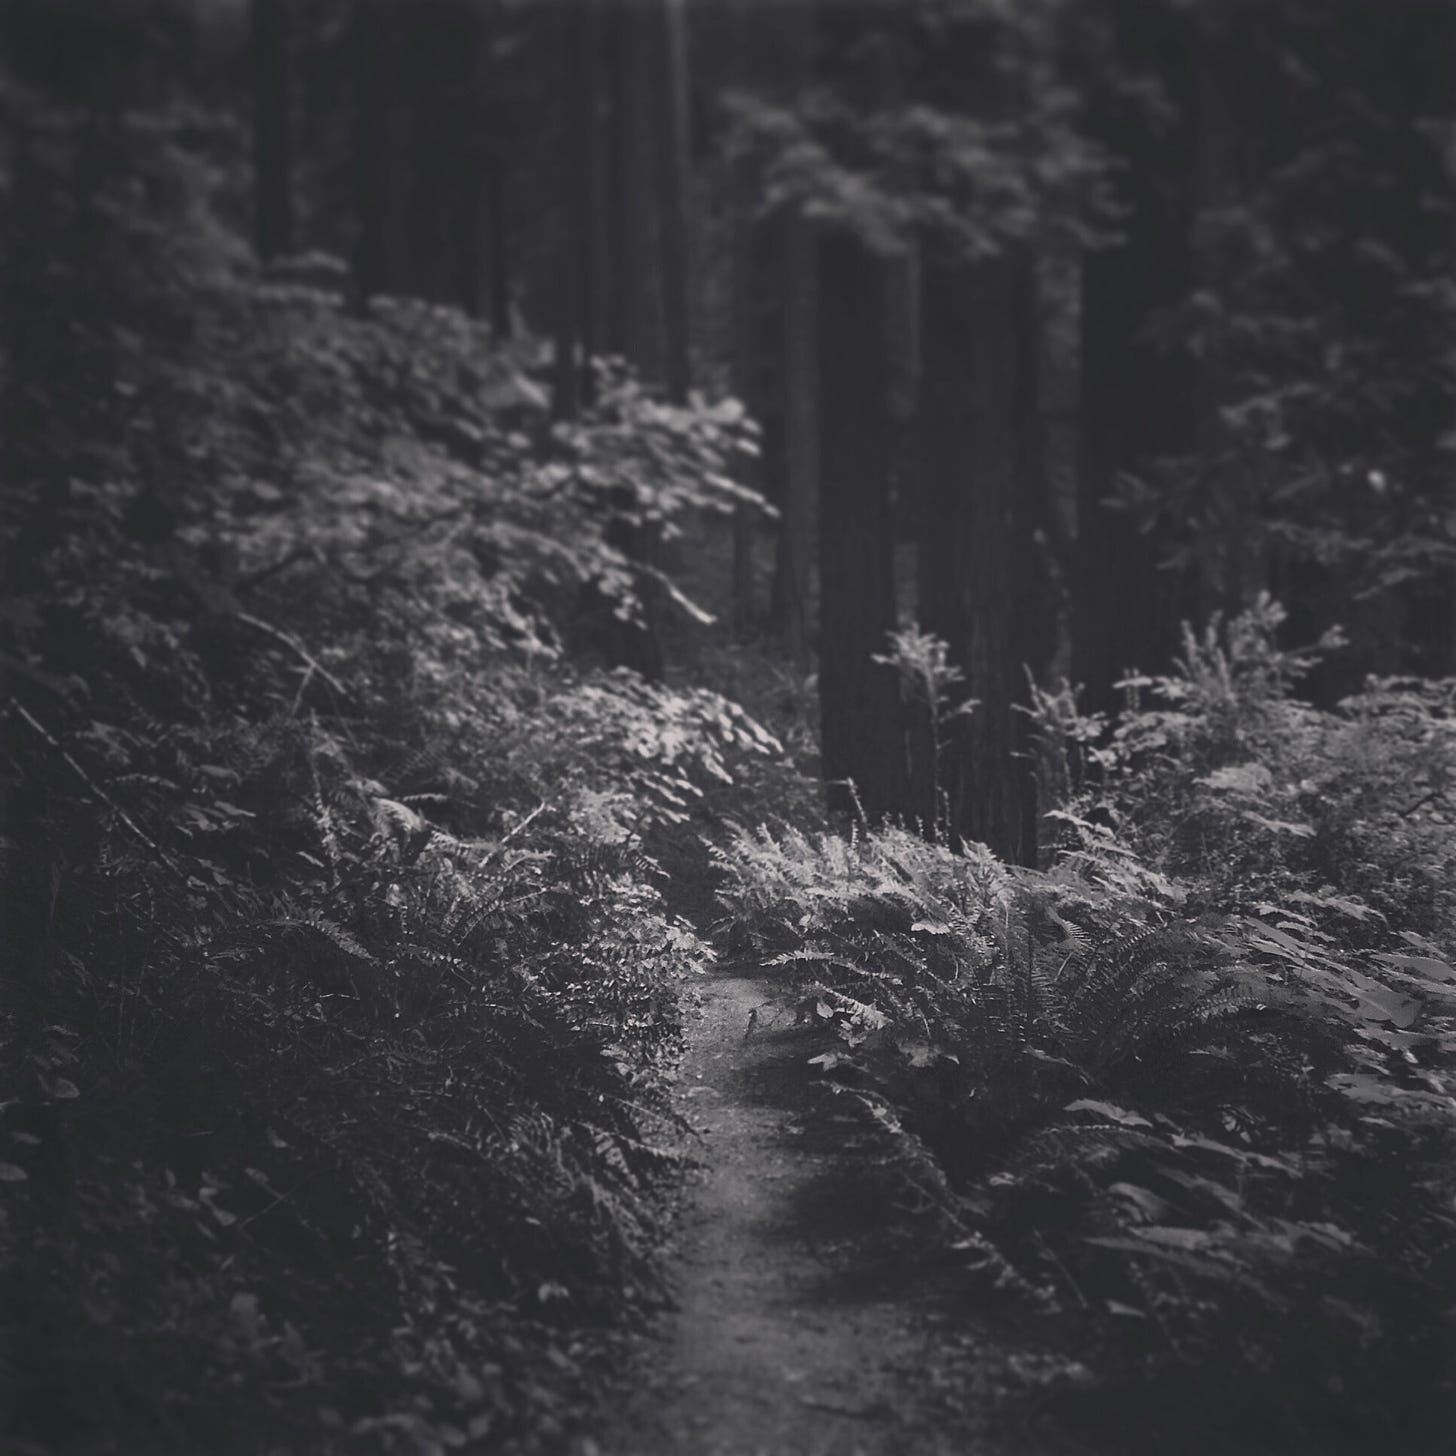 A black and white photograph of a hiking trail. The light is subtle. The depth of field is shallow focusing on the ferns along the trail.